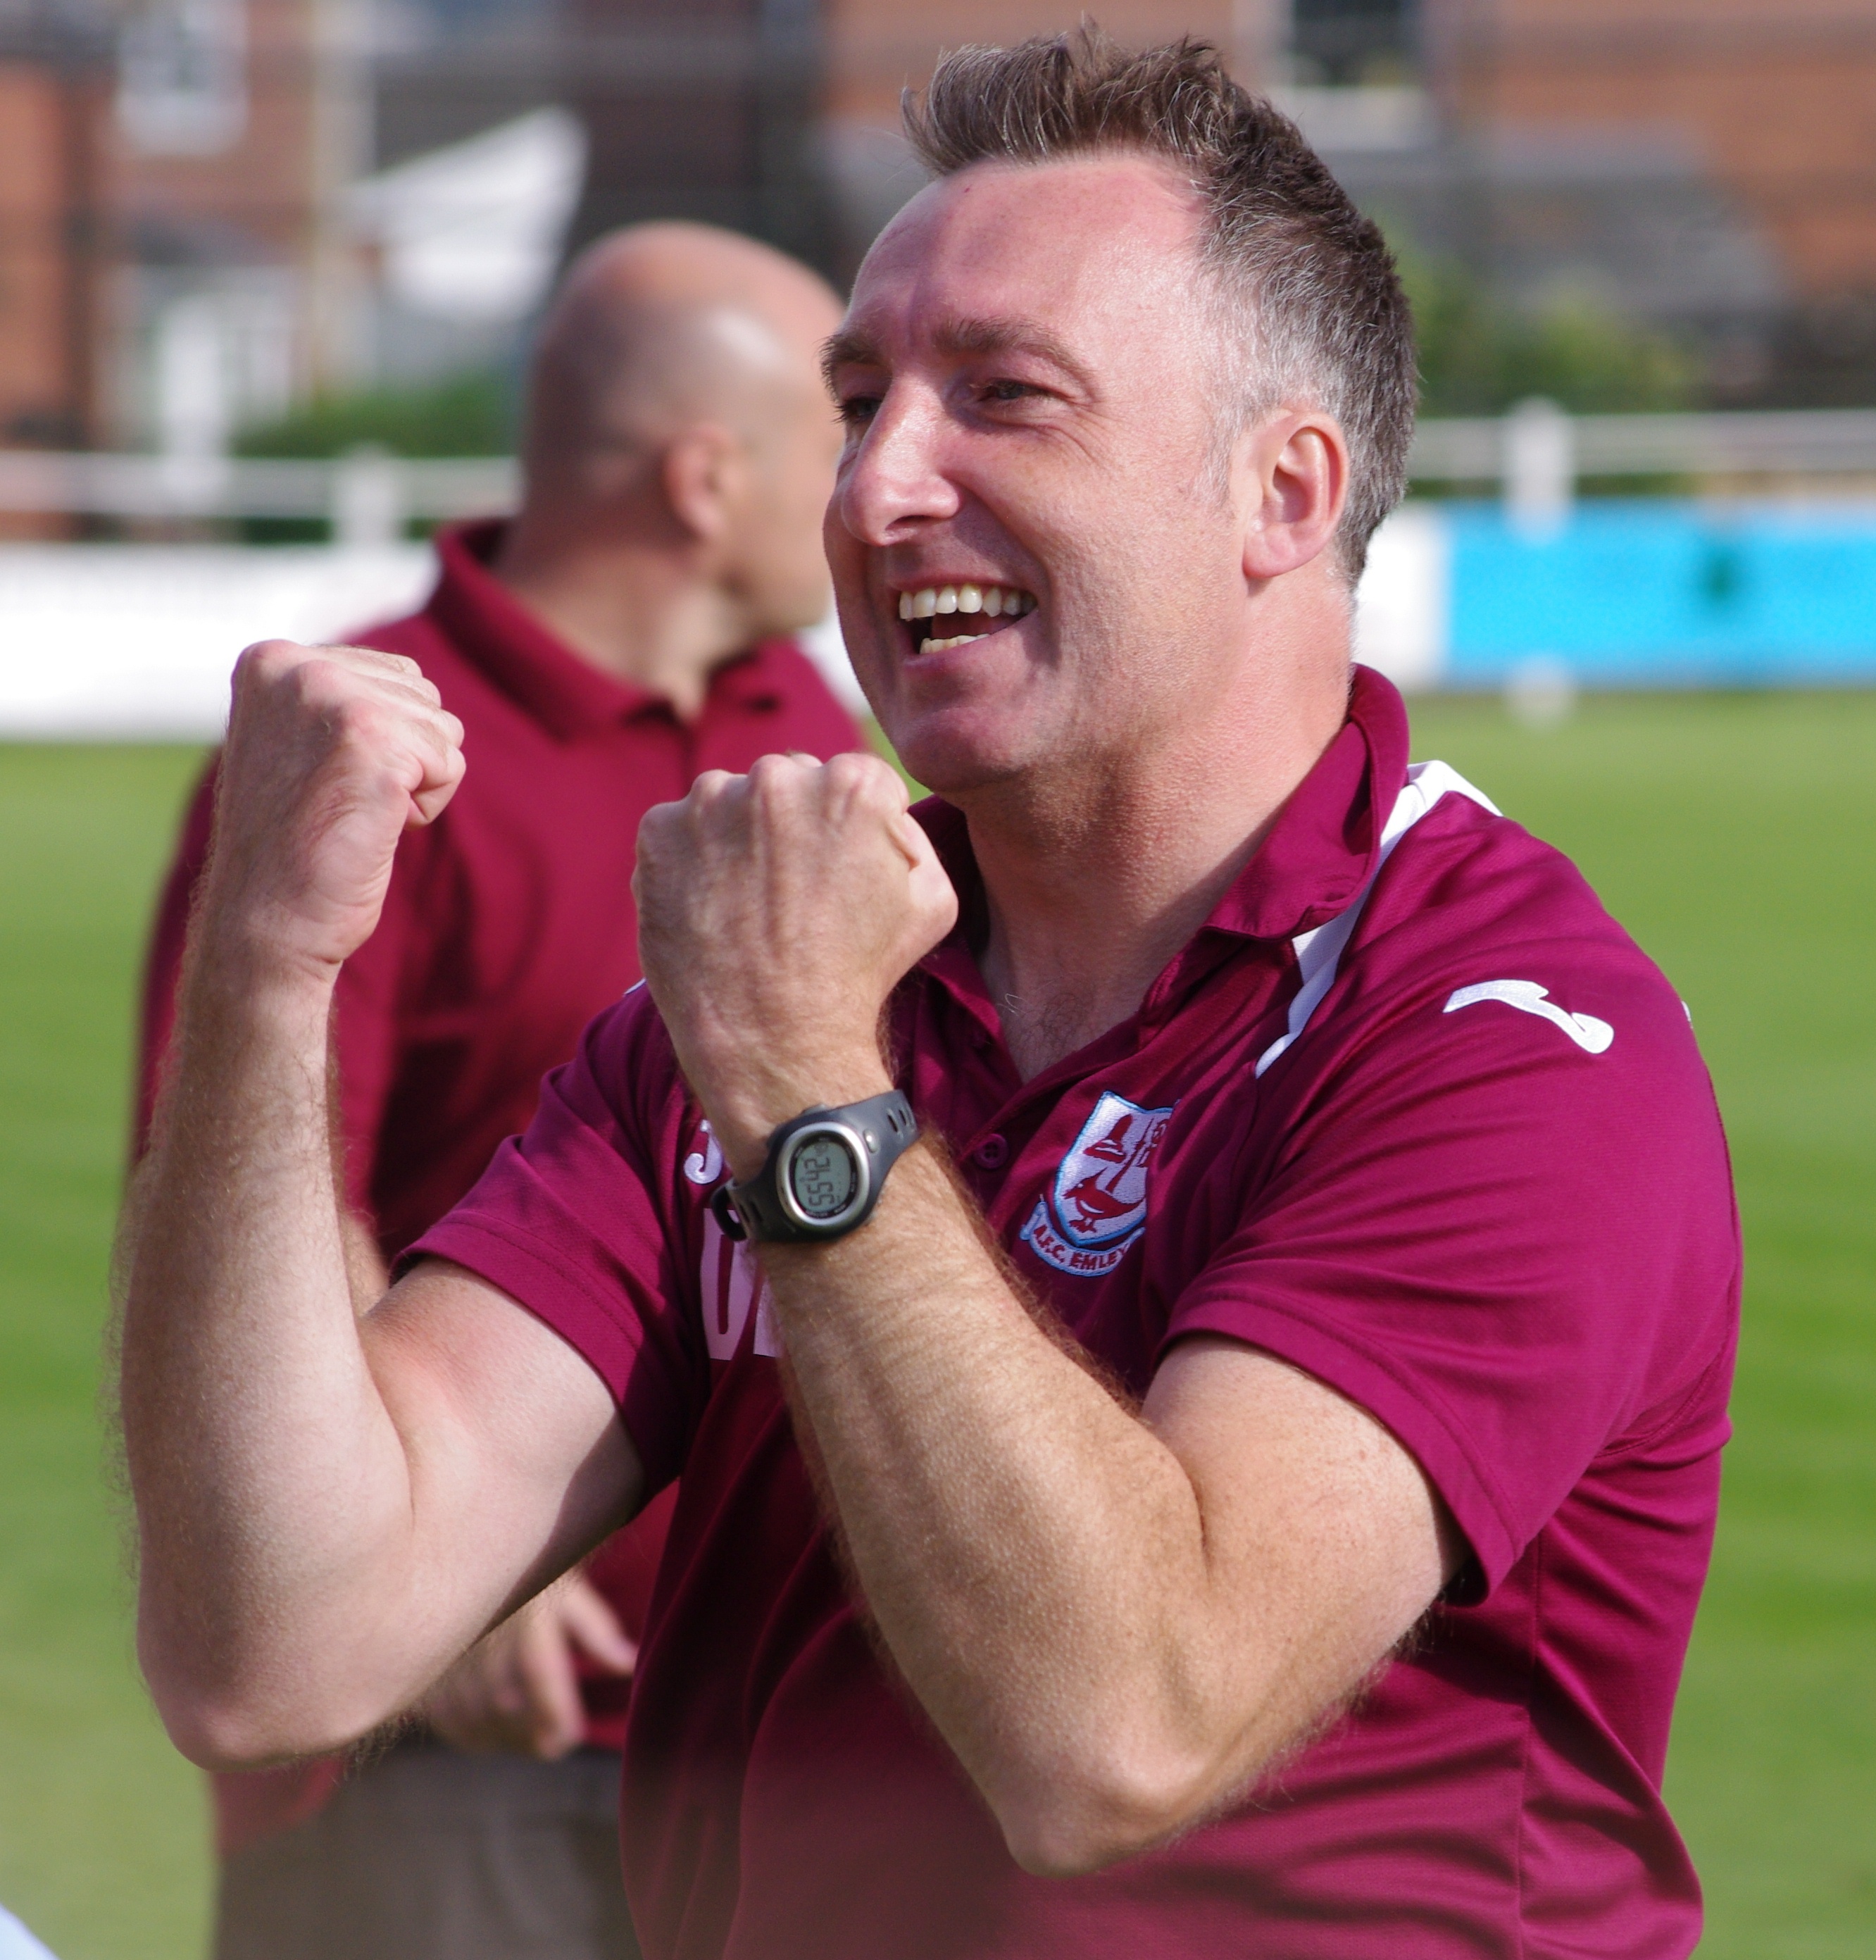 Darren Hepworth, celebrates after the sensational FA Cup win over Wigan Robin Park, says promotion is the aim for AFC Emley next season